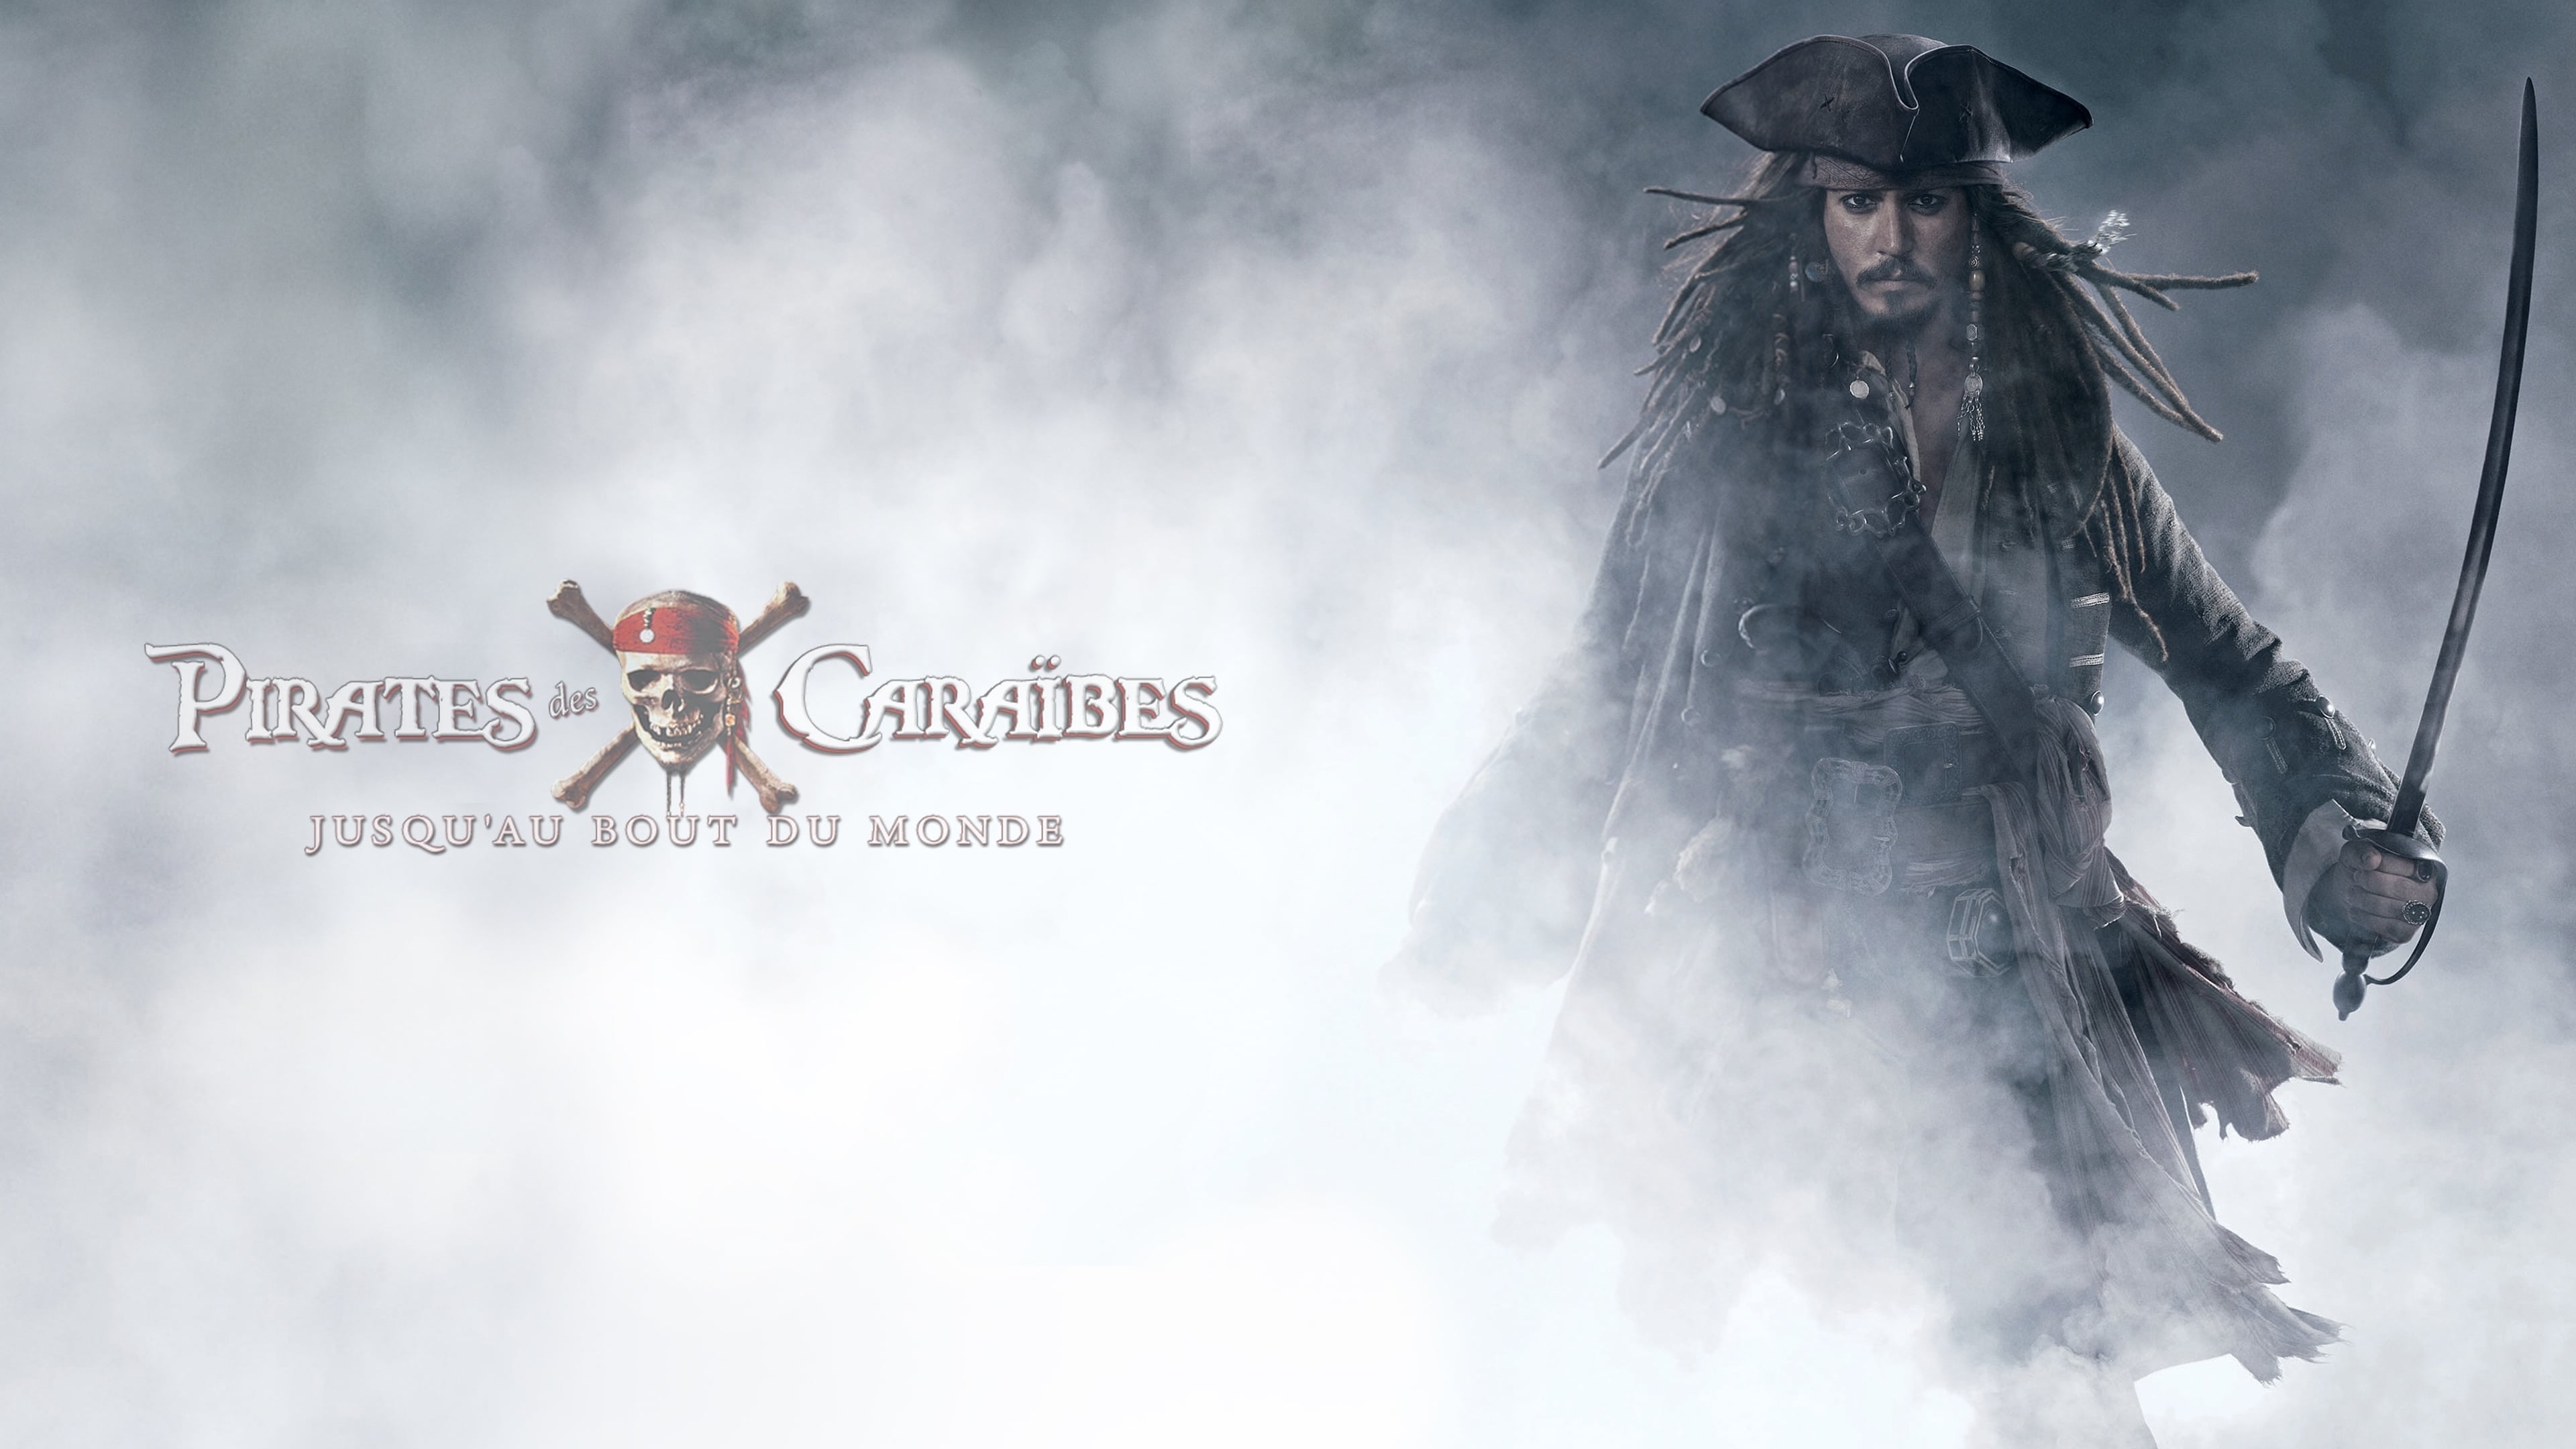 Pirates of the Caribbean: At World's End - Movie - Streaming-4k - Pirates Of The Caribbean At World's End Streaming